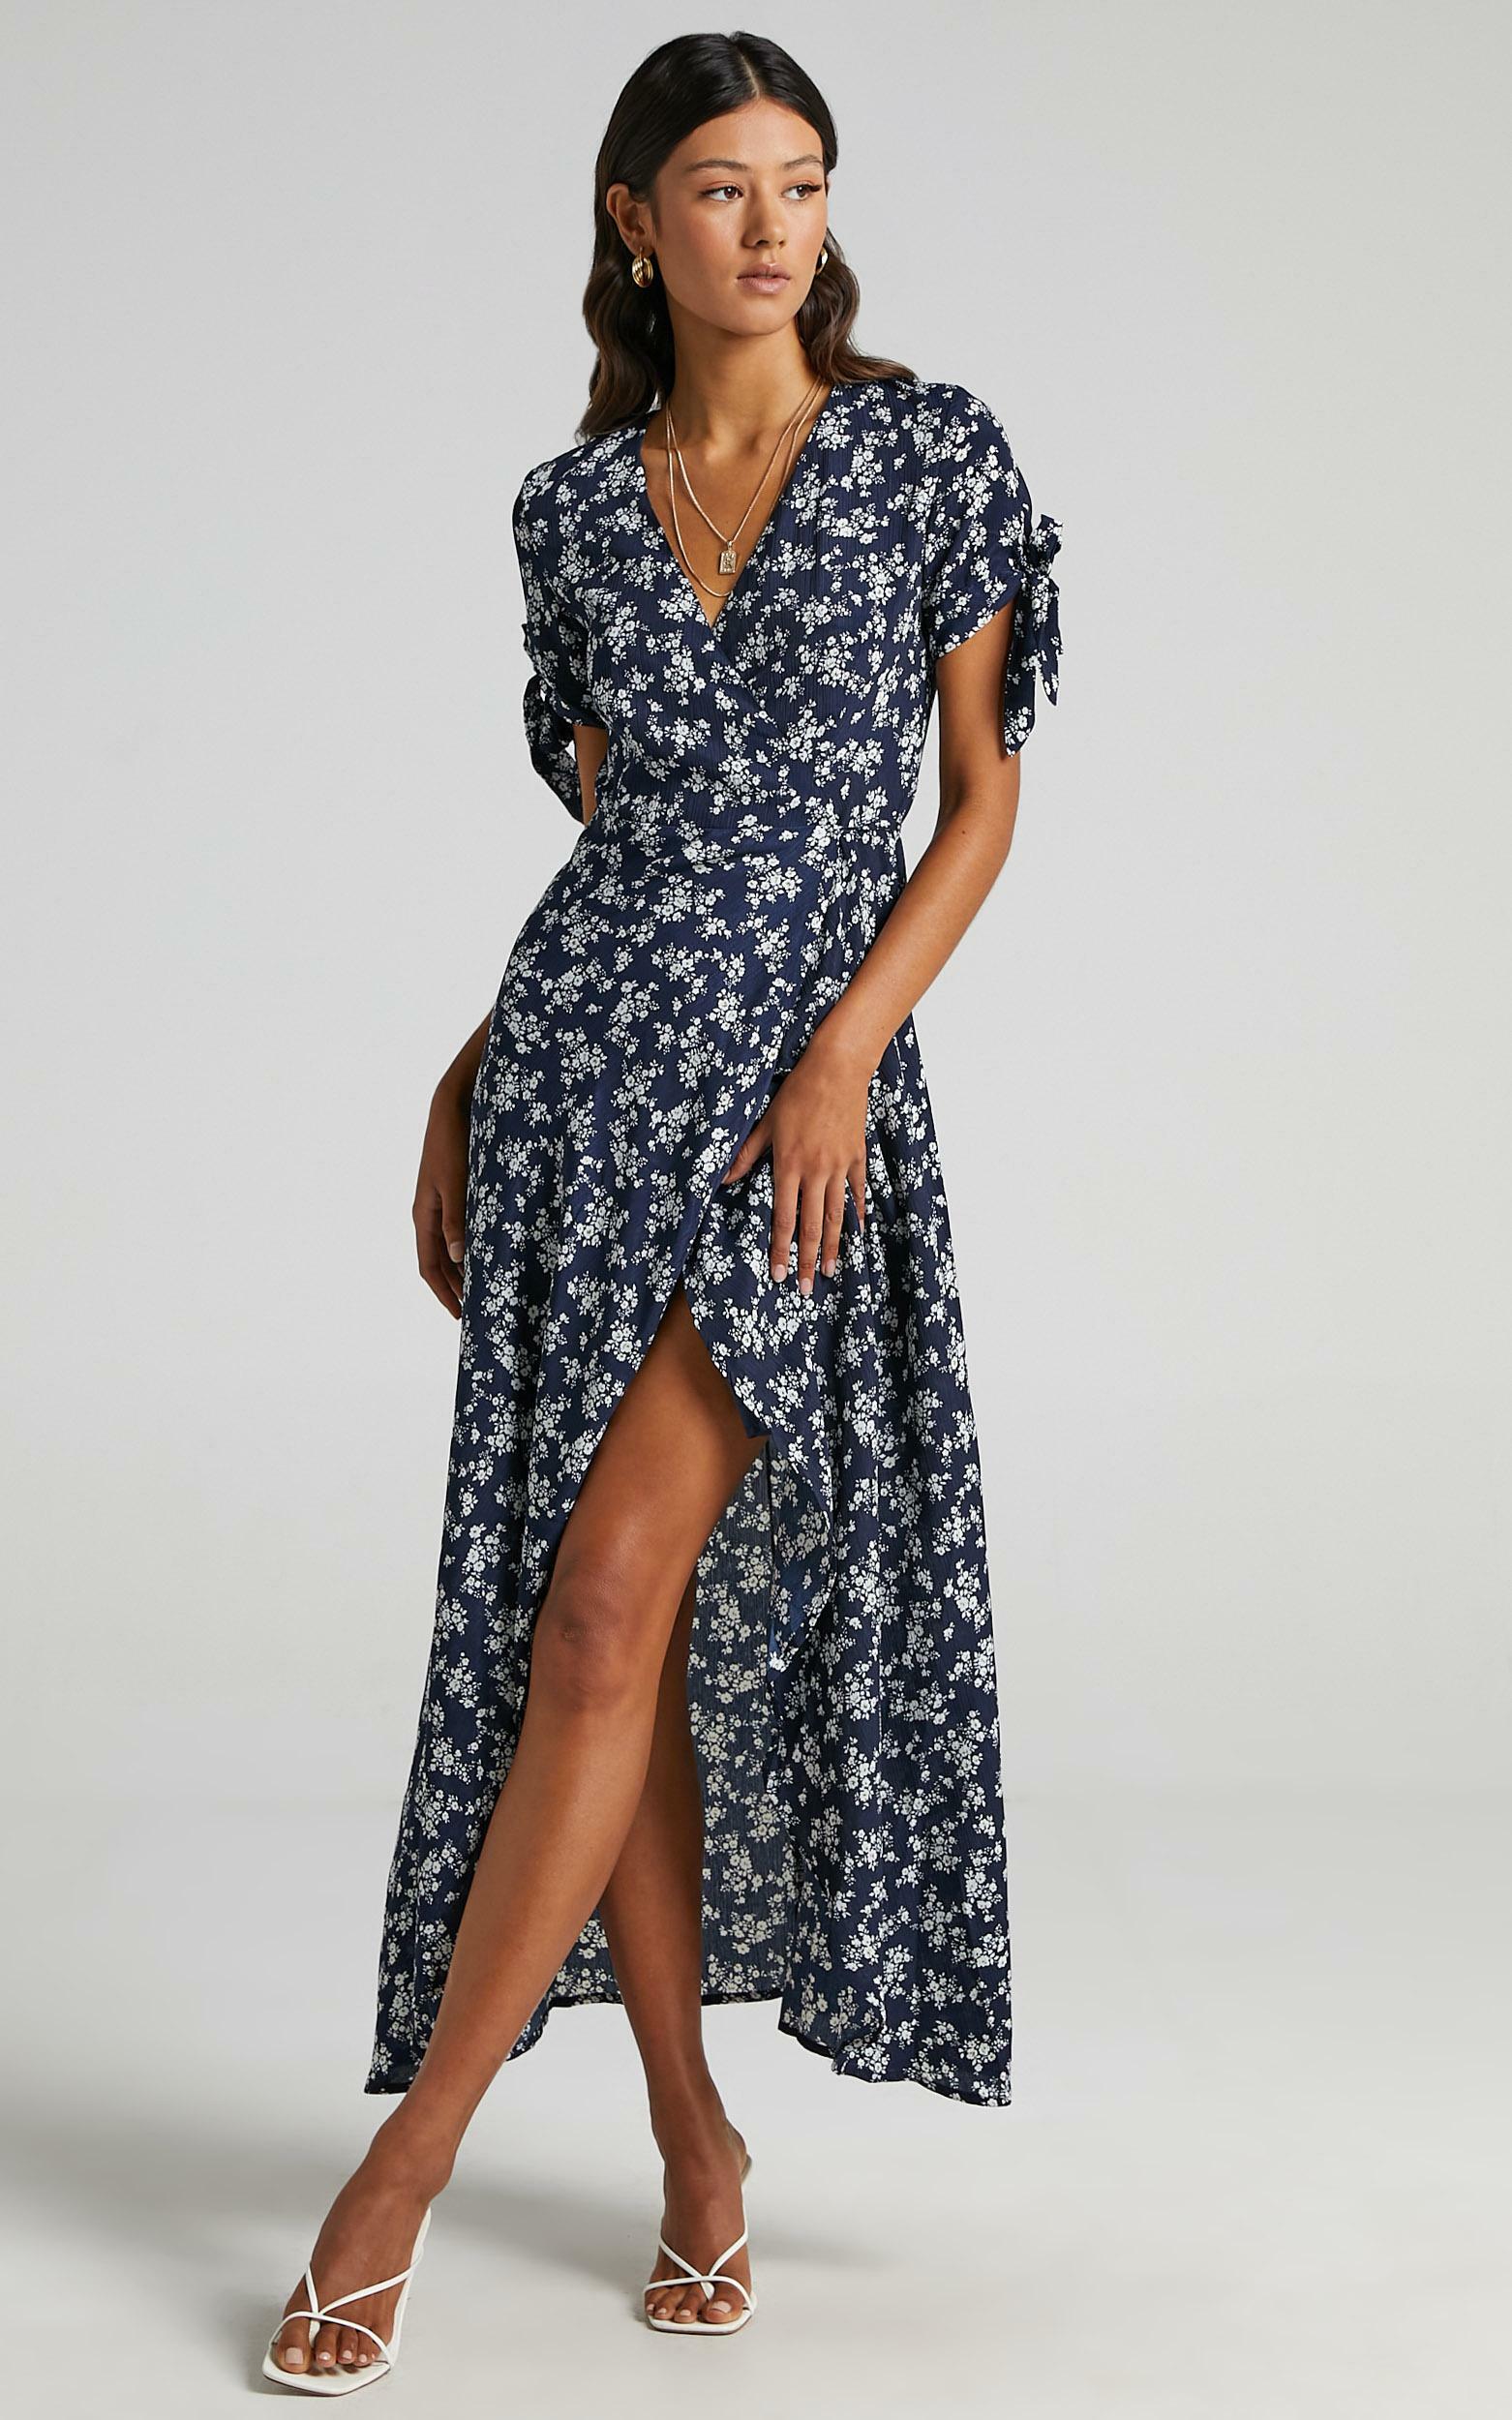 Picking It Up Wrap Maxi Dress in Navy Floral | Showpo